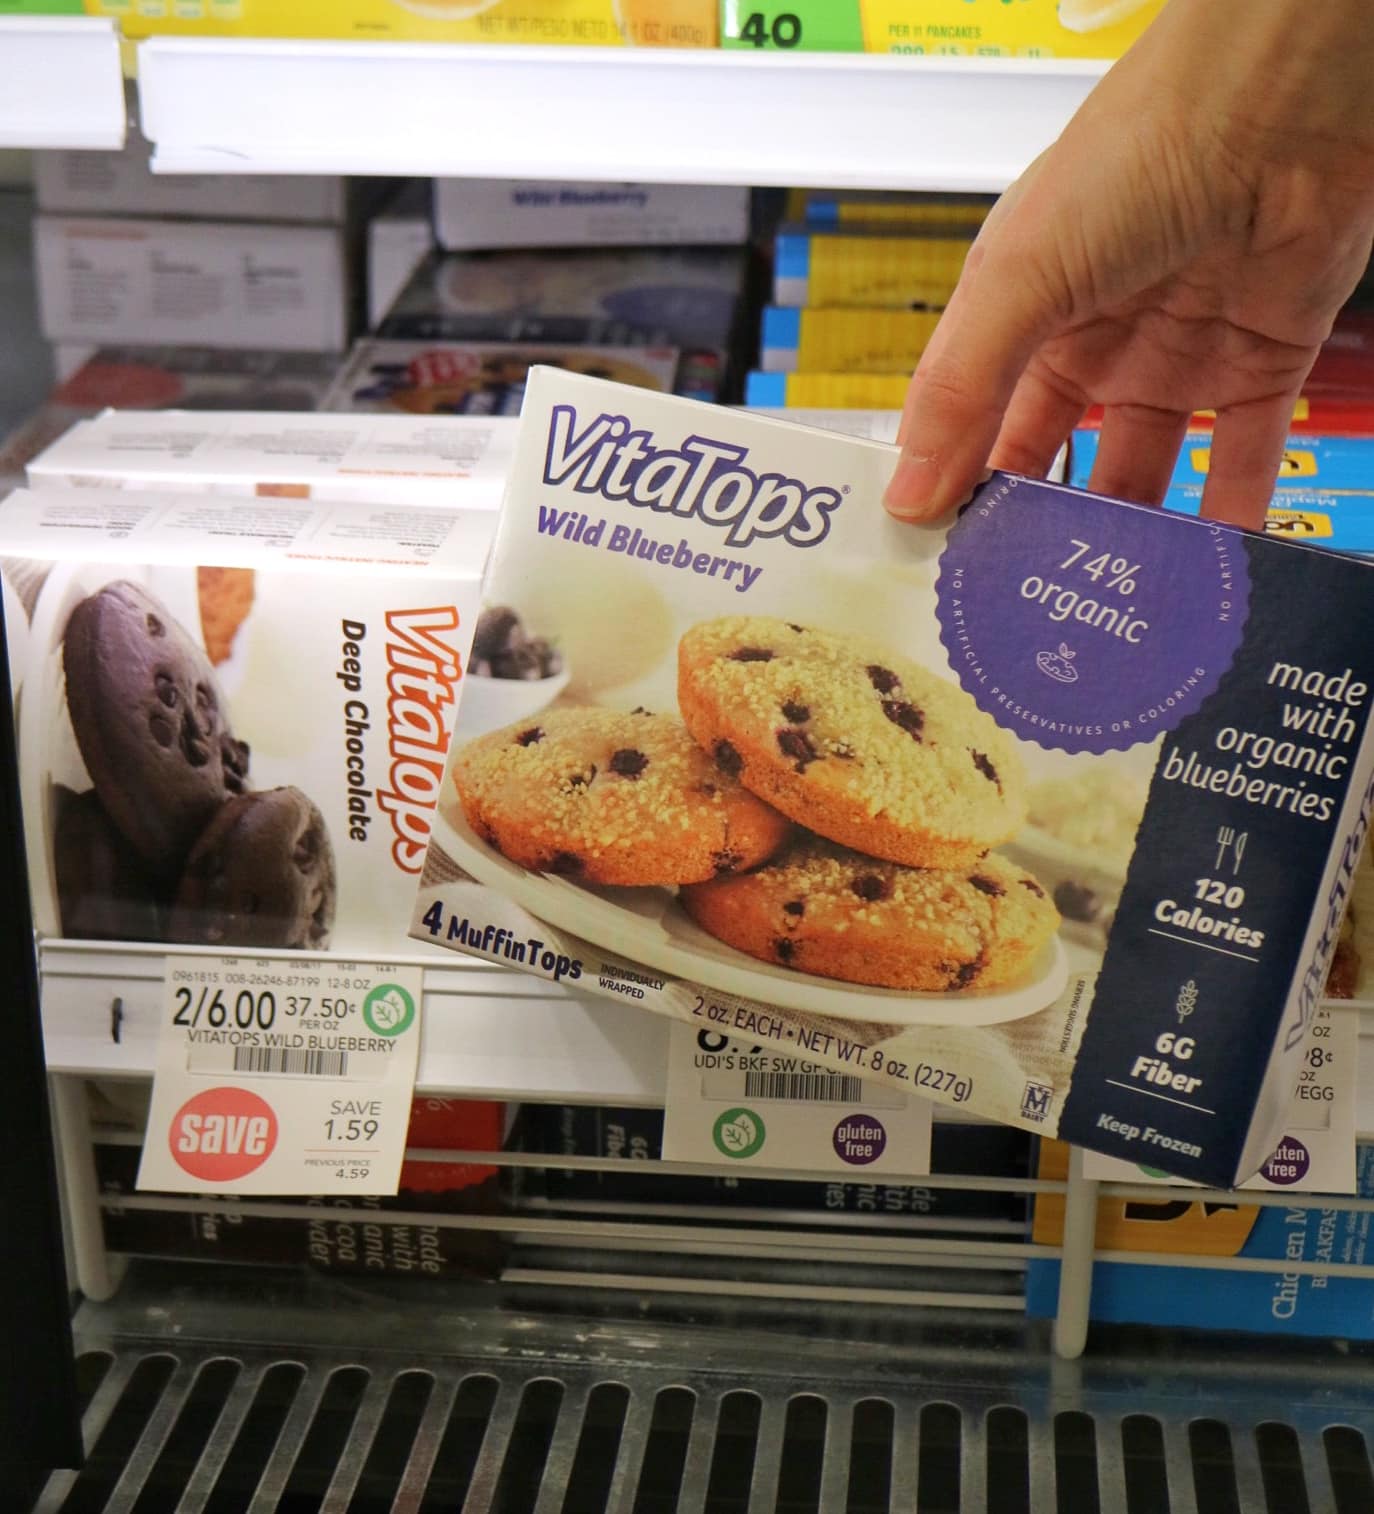 Boxes of VitaTops wild blueberry and deep chocolate flavored muffin tops